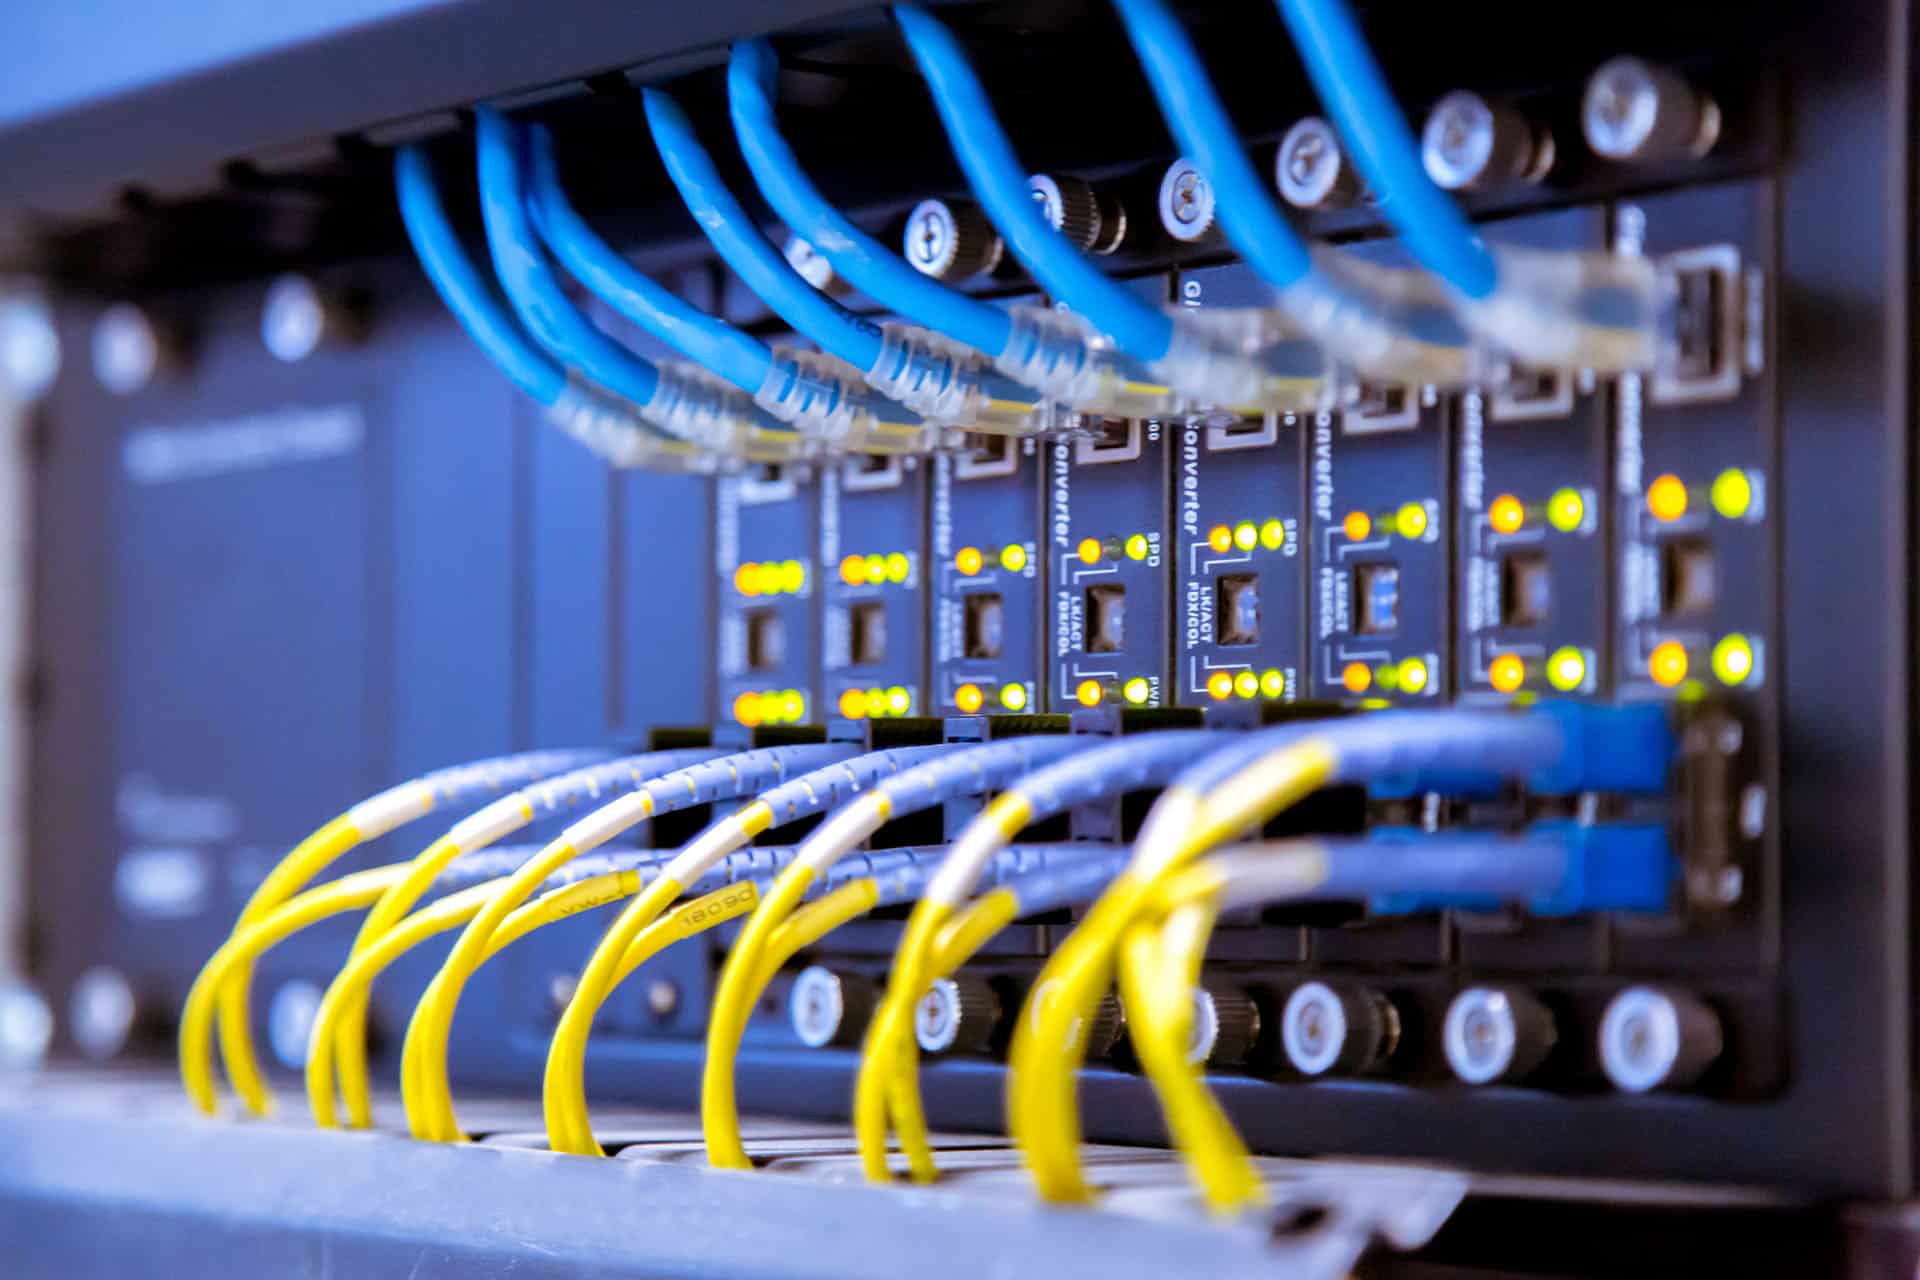 network switch and ethernet cables in data center